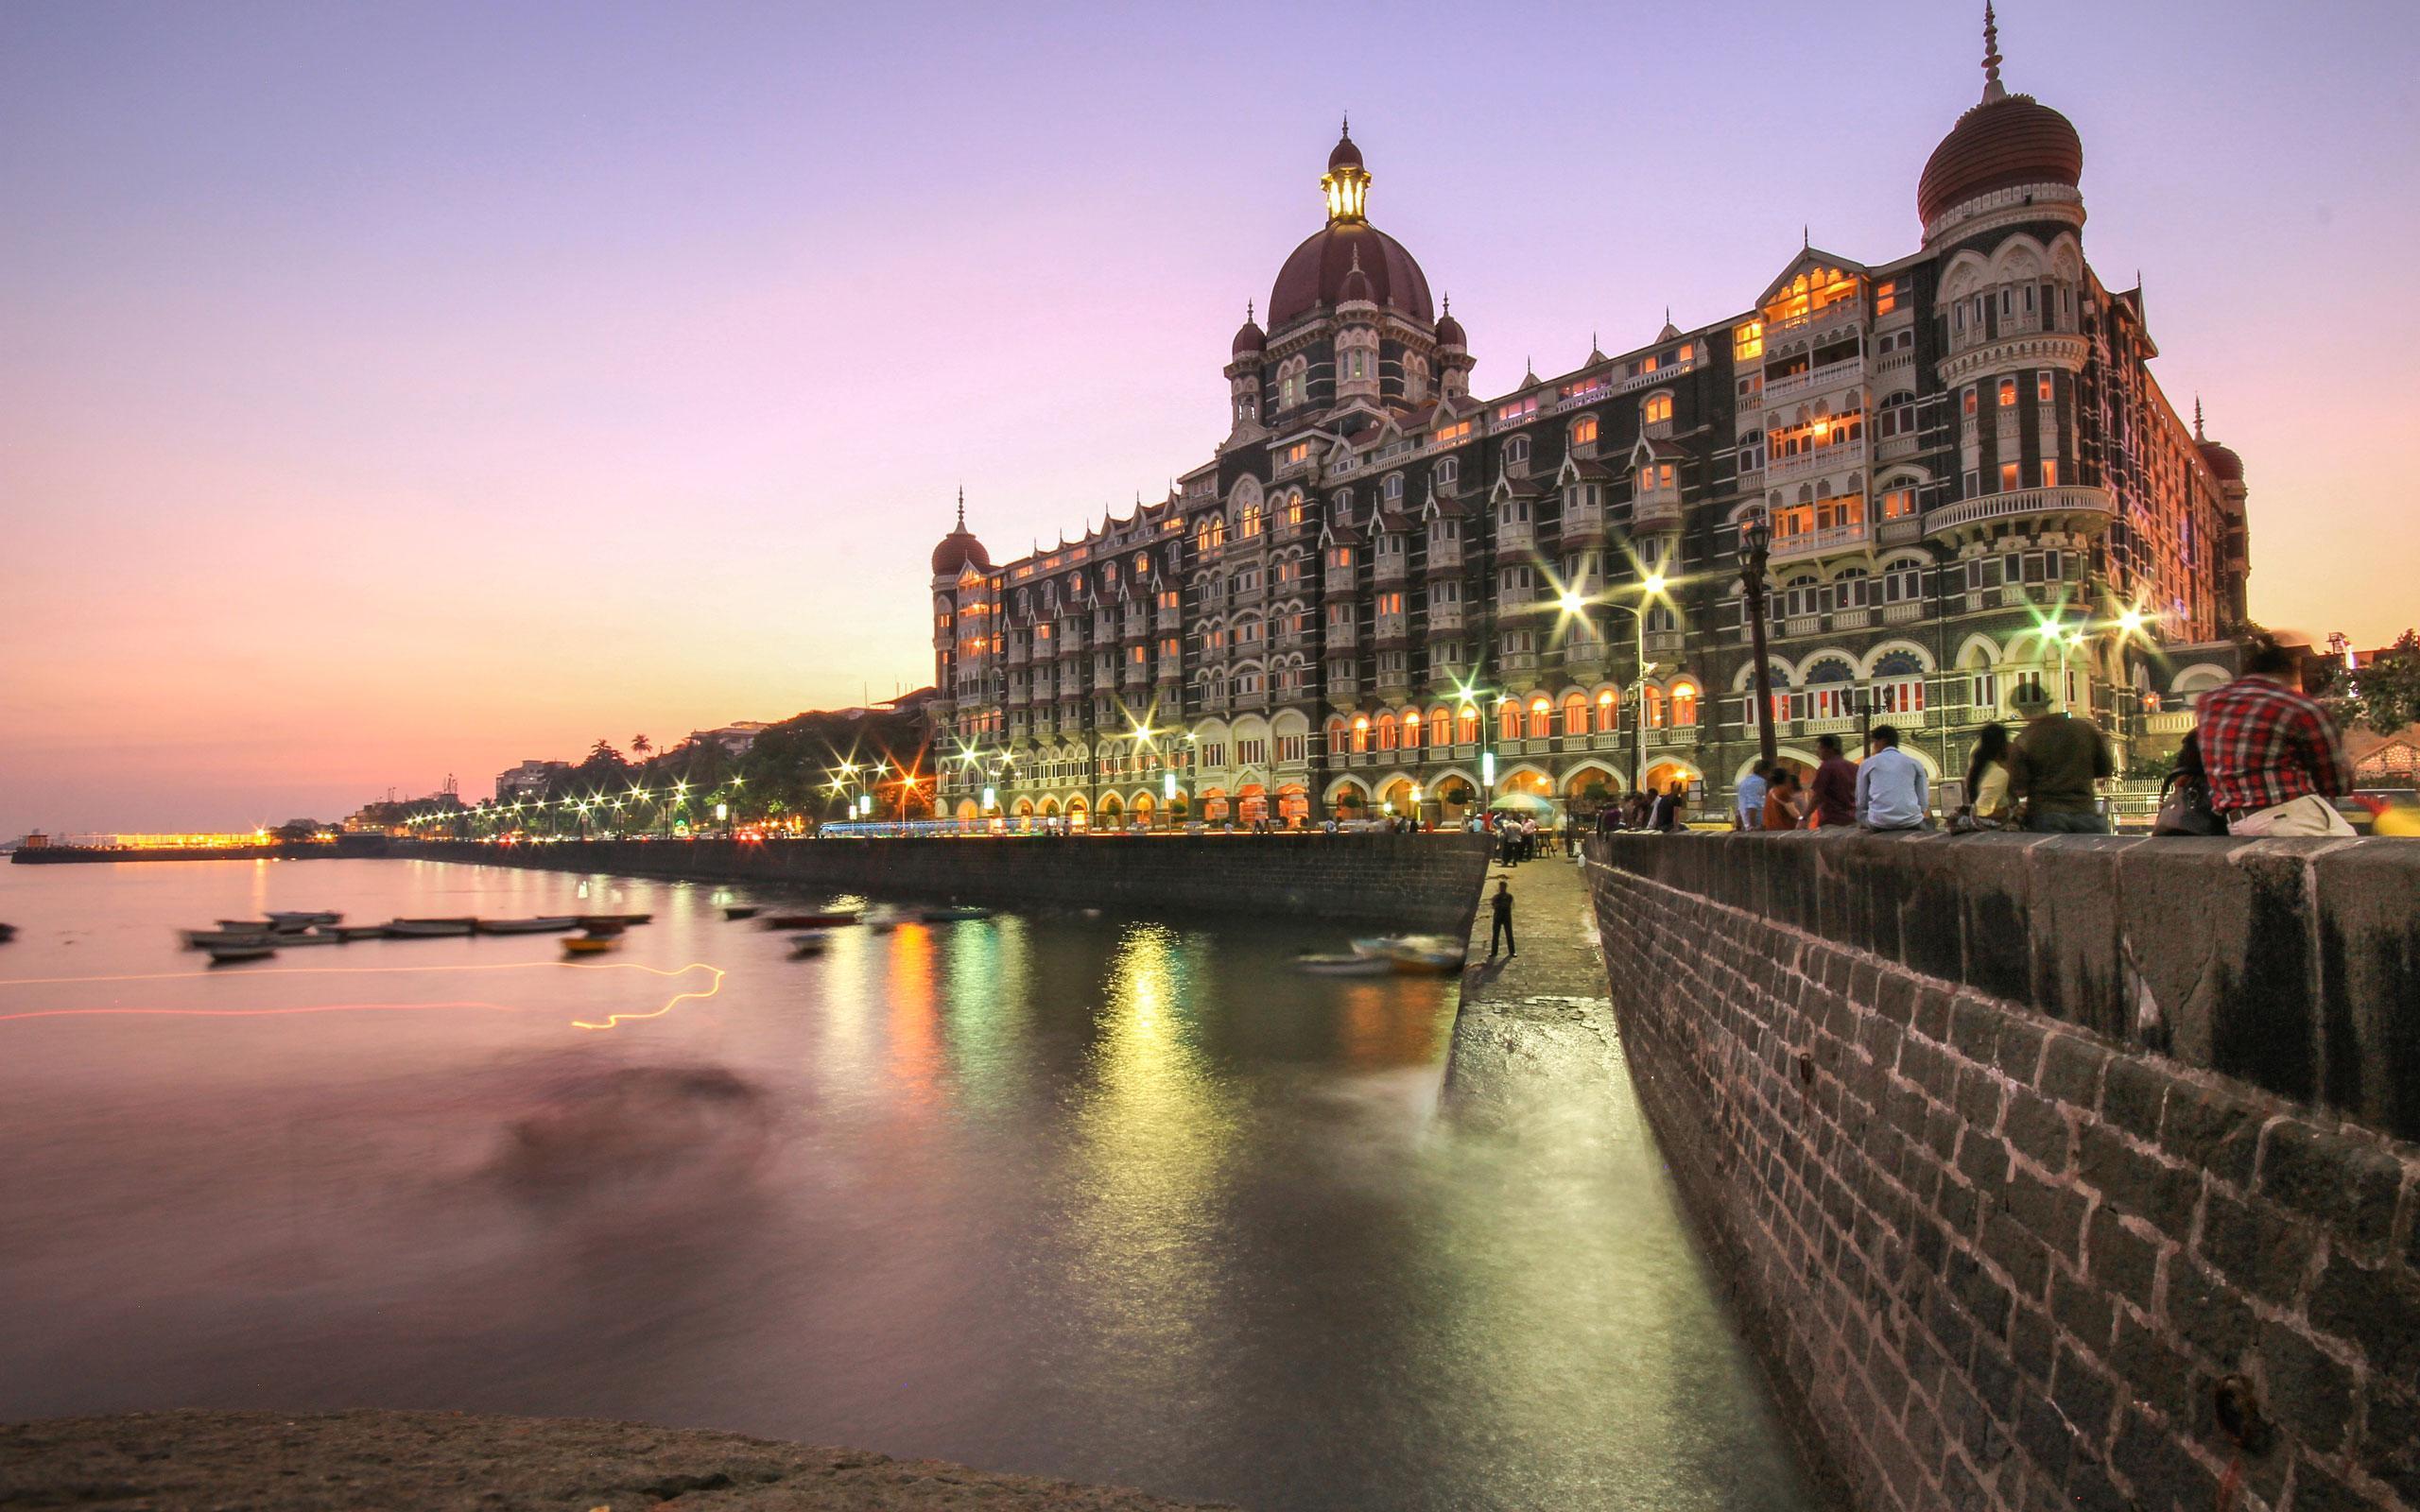 Mumbai City Stock Photos Images and Backgrounds for Free Download